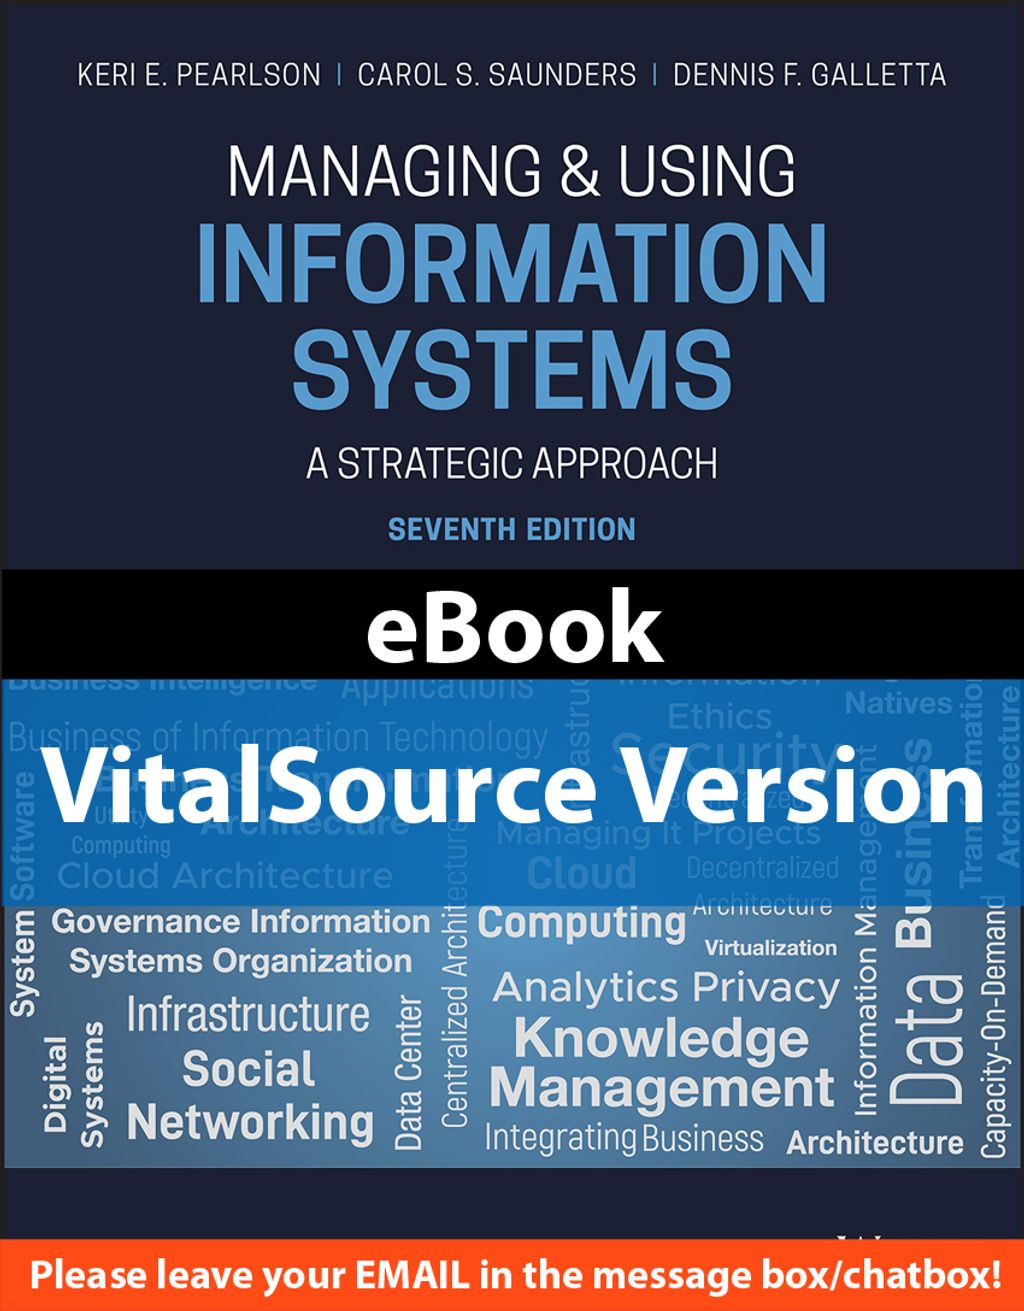 https://www.booklinksonline.com/products/managing-and-using-information-systems-a-strategic-approach-7th-edition-ebook-only-